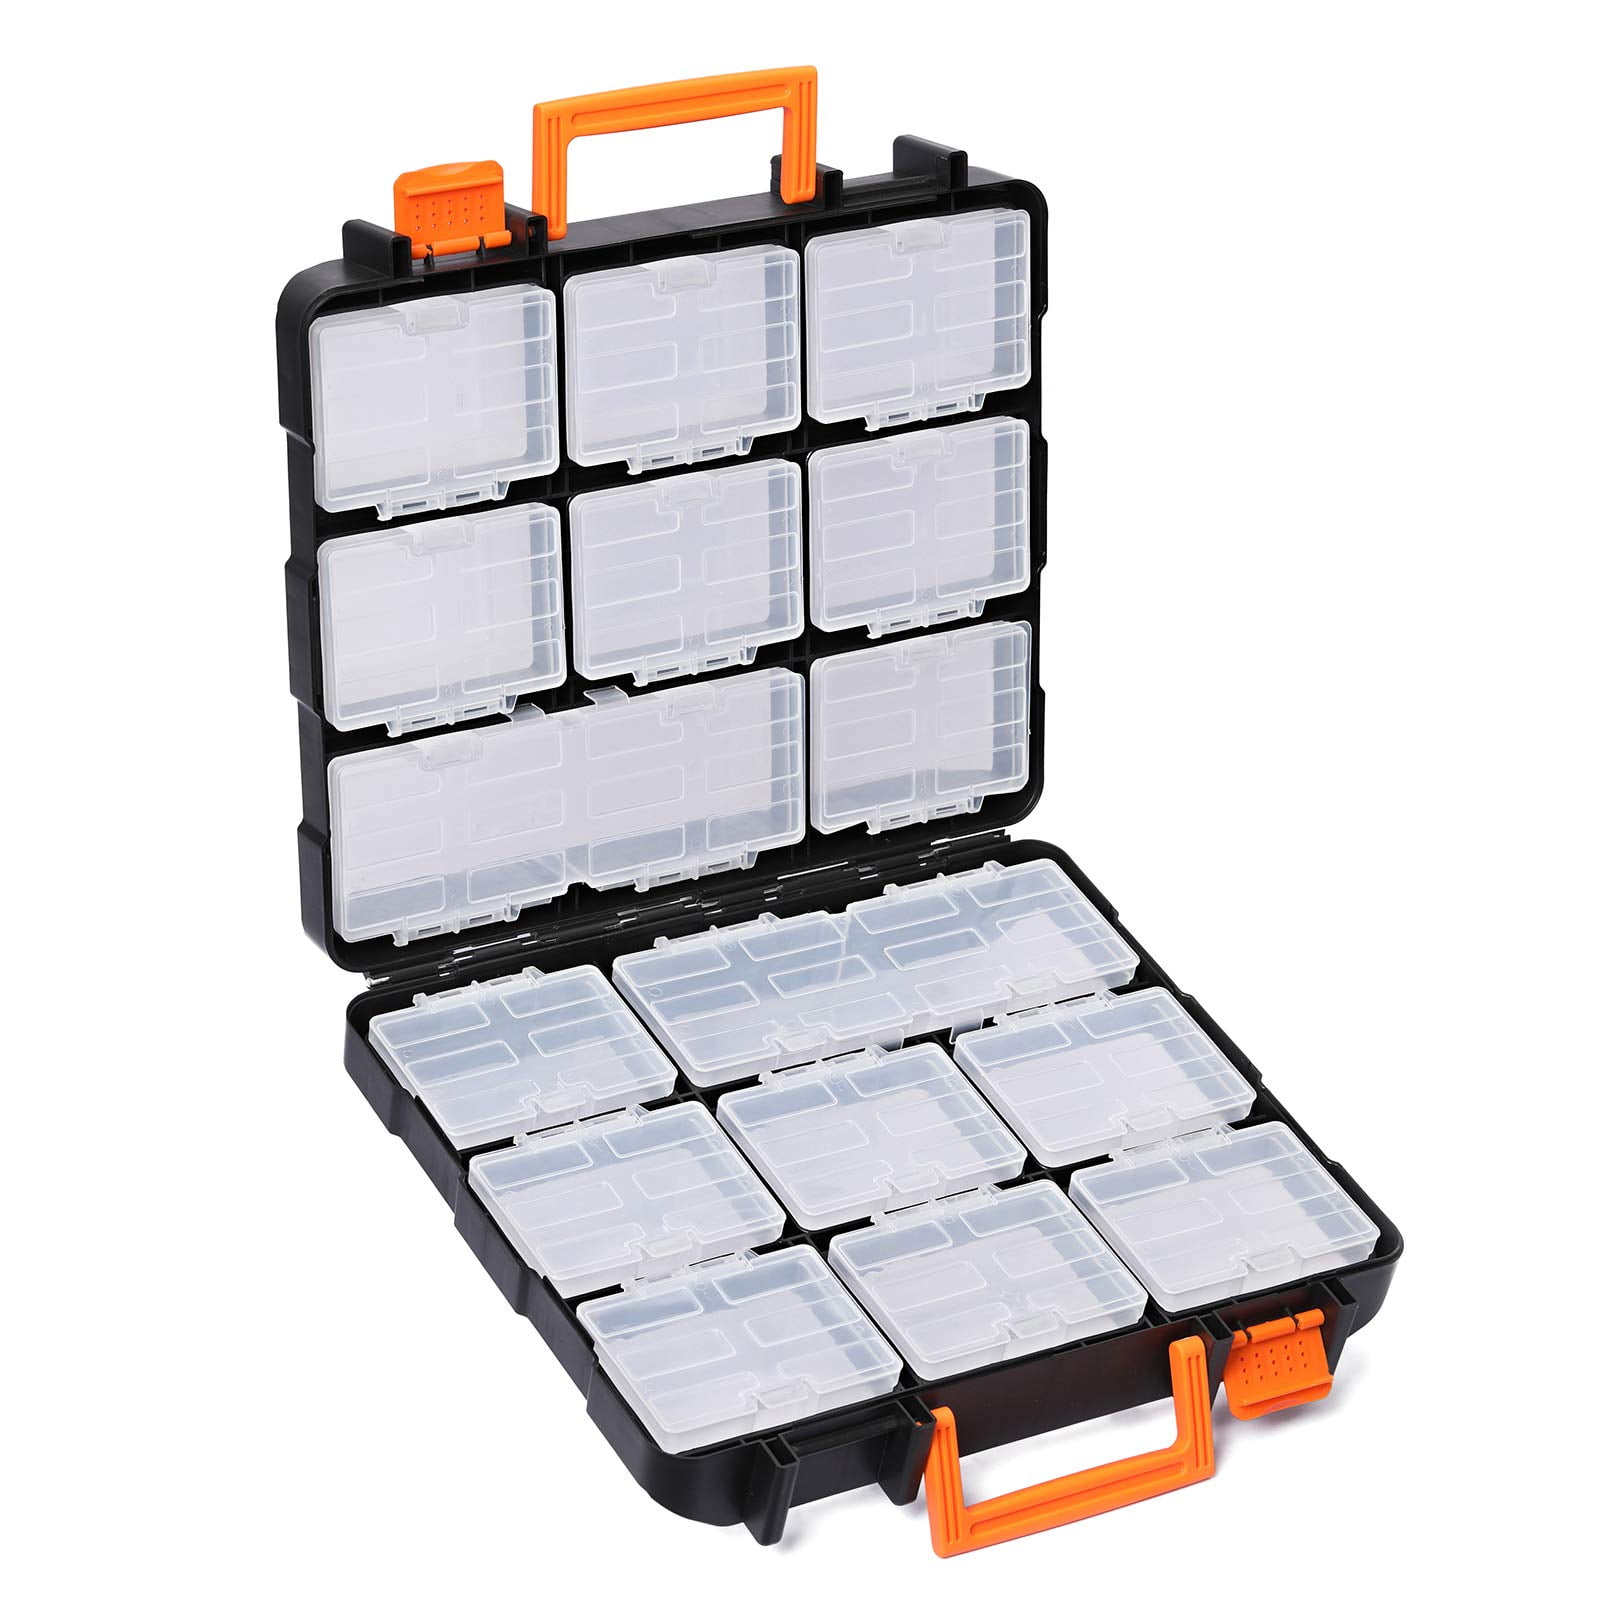 MIXPOWER 16.5-Inch Portable Storage Organizer with Double Secure Locks and  25 Removable Bin Compartments, Multi-Purpose Hardware ToolBox Storage